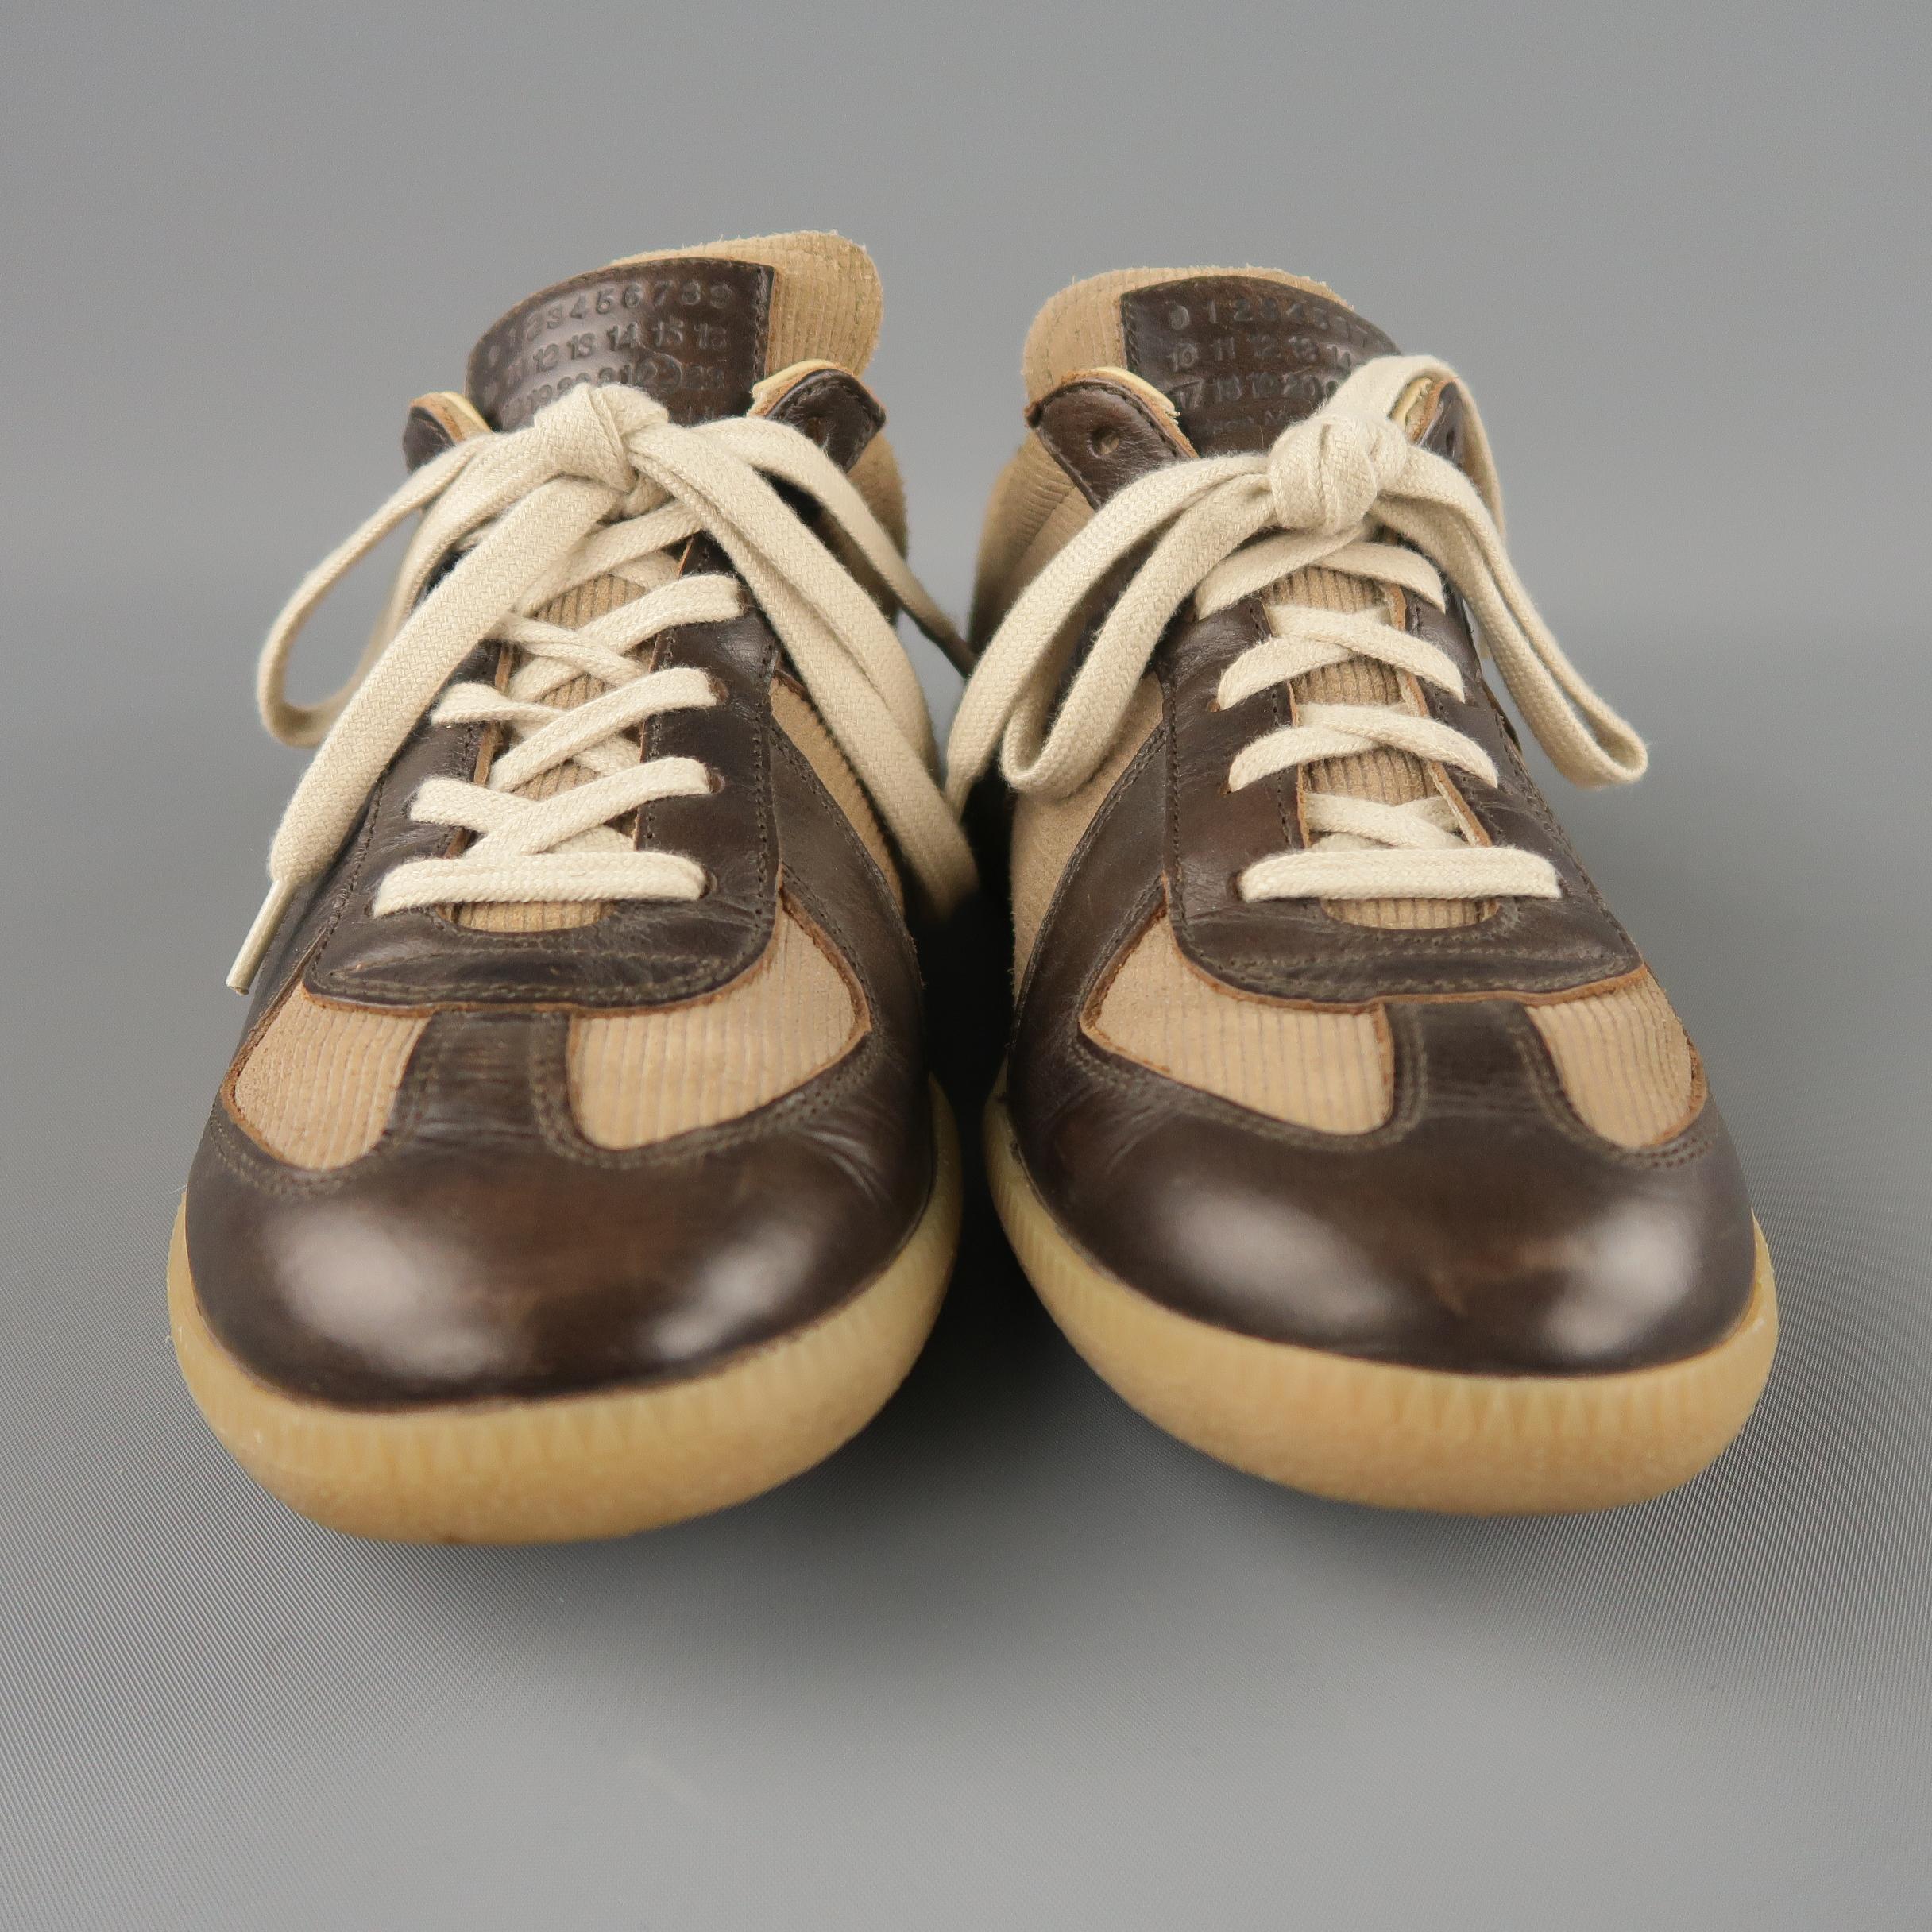 MAISON MARTIN MARGIELA 'REPLICA' low top sneaker comes in a brown canvas, leather trim details, and a rubber sole. Made in Italy.
 
Excellent Pre-Owned Condition.
Marked: 40
 
Measurements:
 
Width: 4 in.
Length: 11 in.